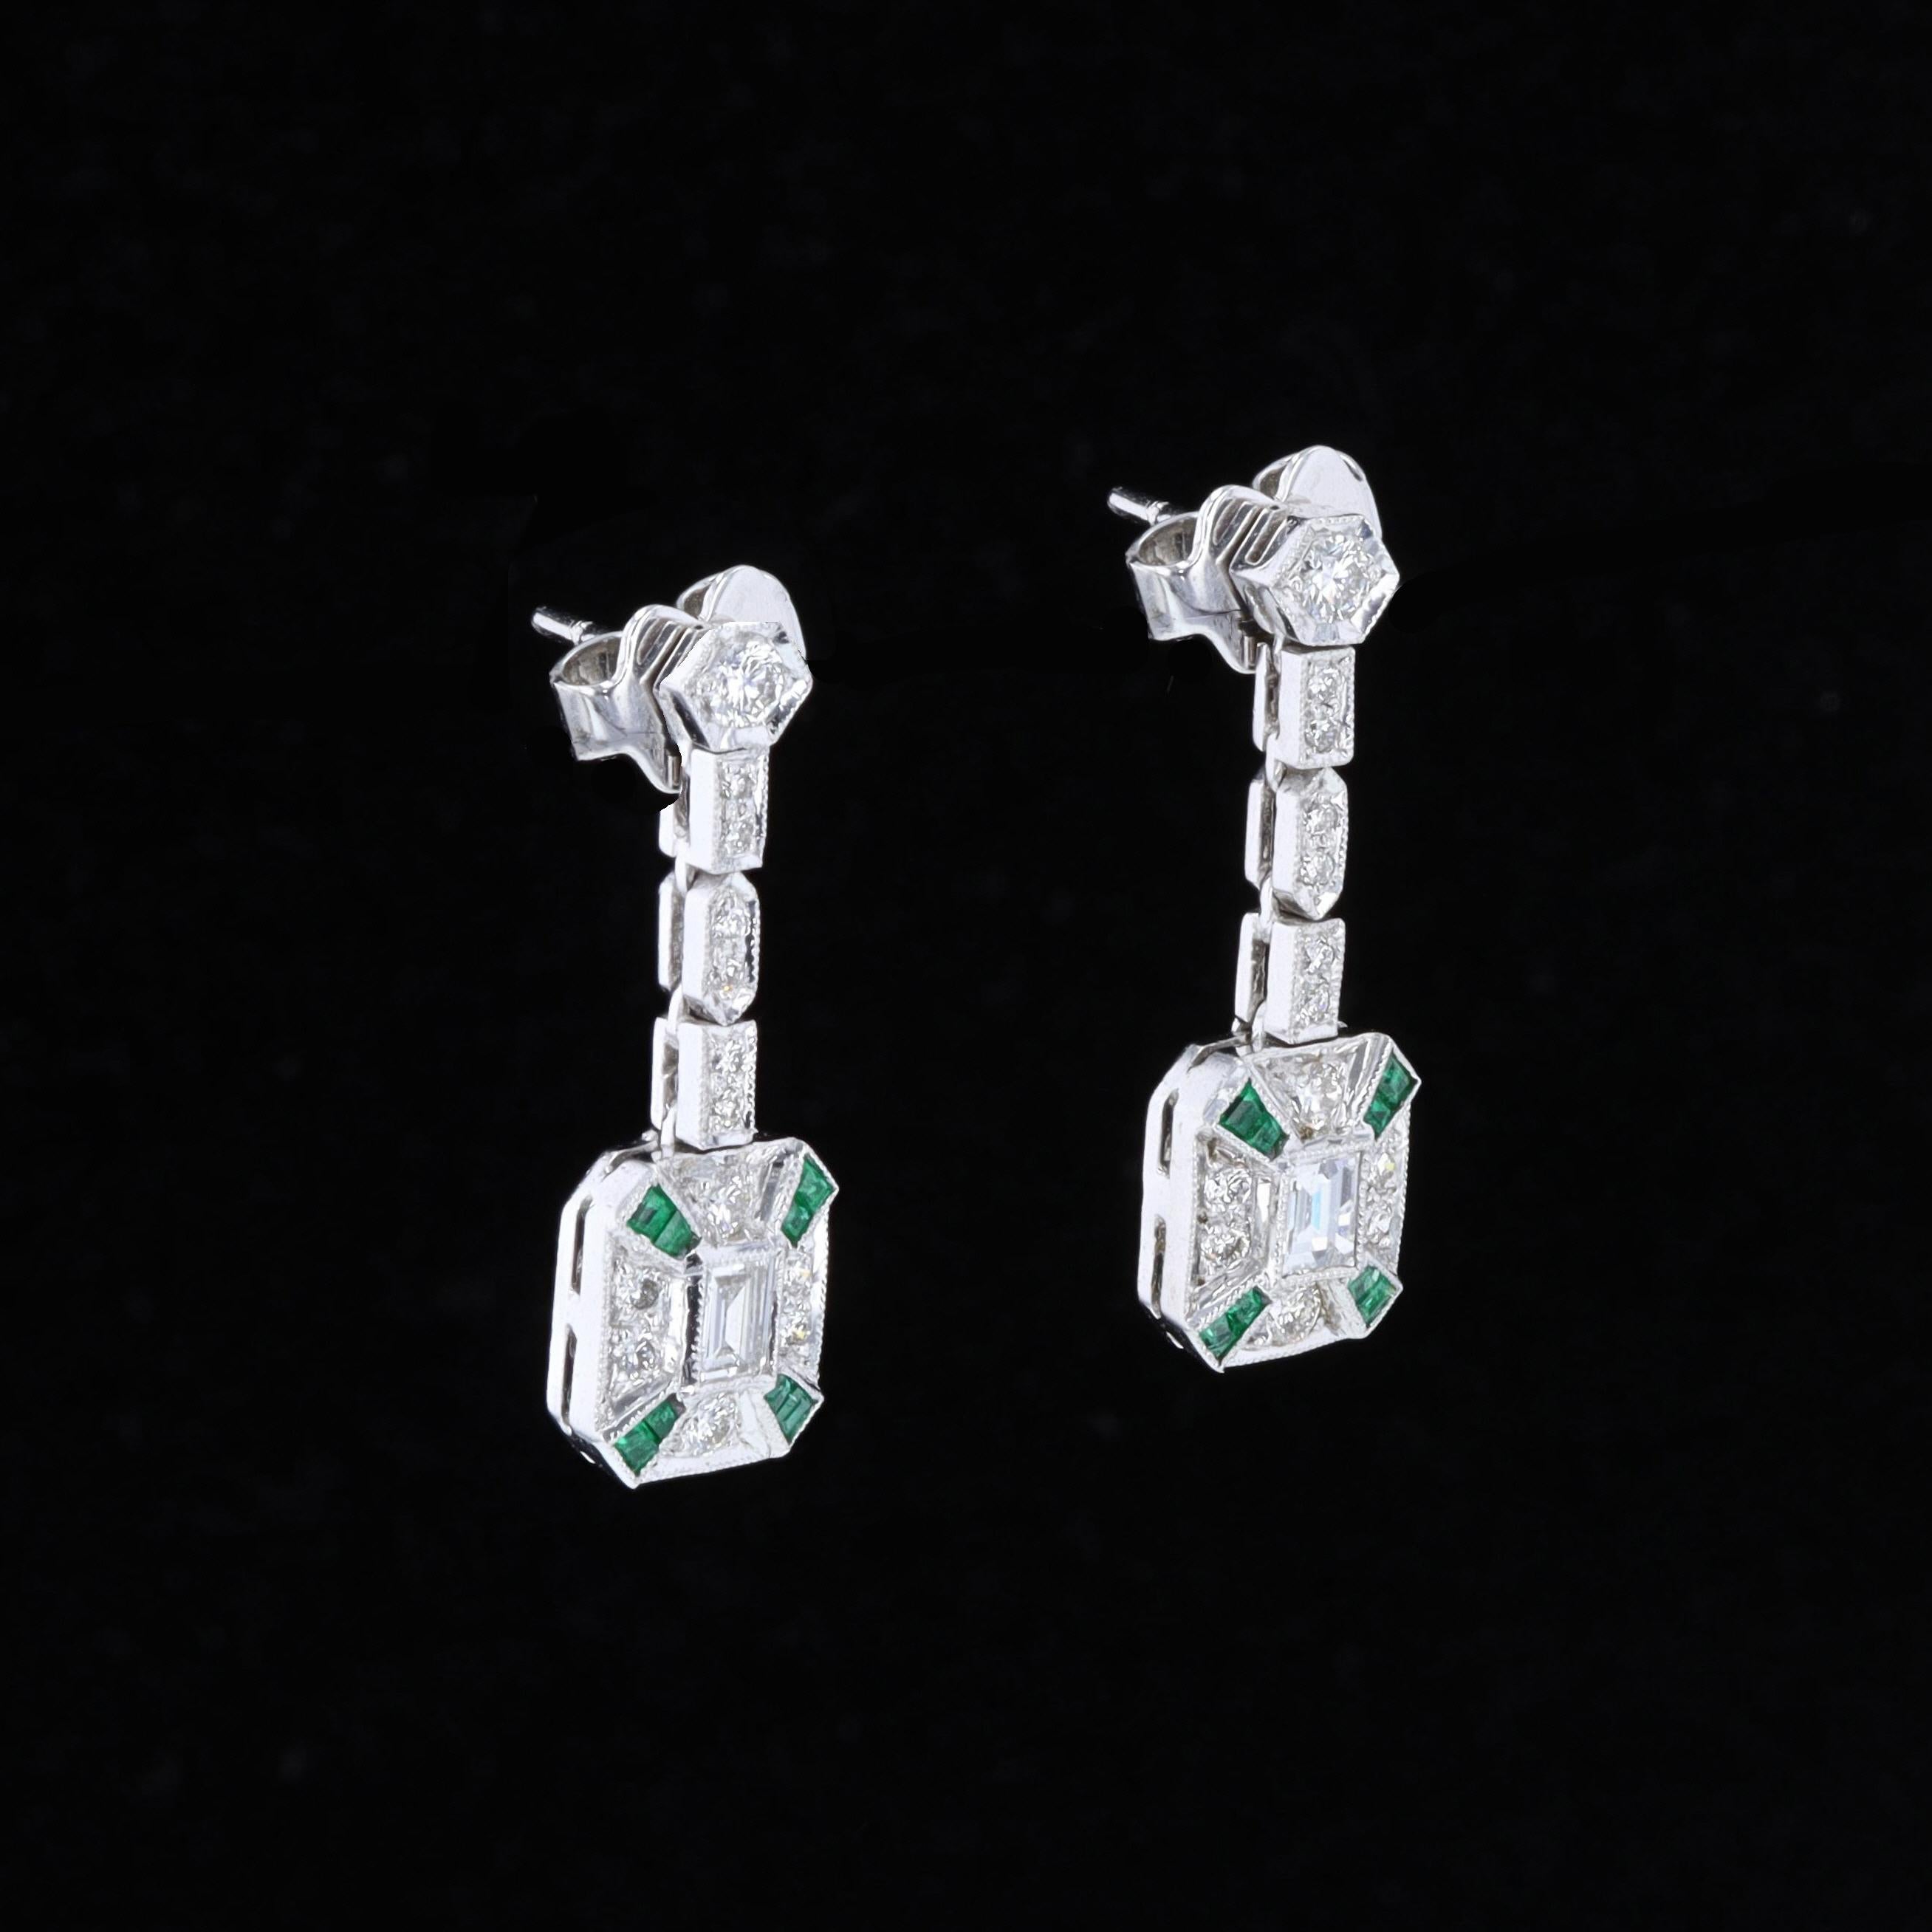 Exquisite workmanship combines elegance and opulence in this pair of vintage emerald and diamond earrings. The 18K white gold earrings feature round and emerald cut diamonds and emeralds and measure 27mm by 9mm. The earrings weigh 7.2 grams.

